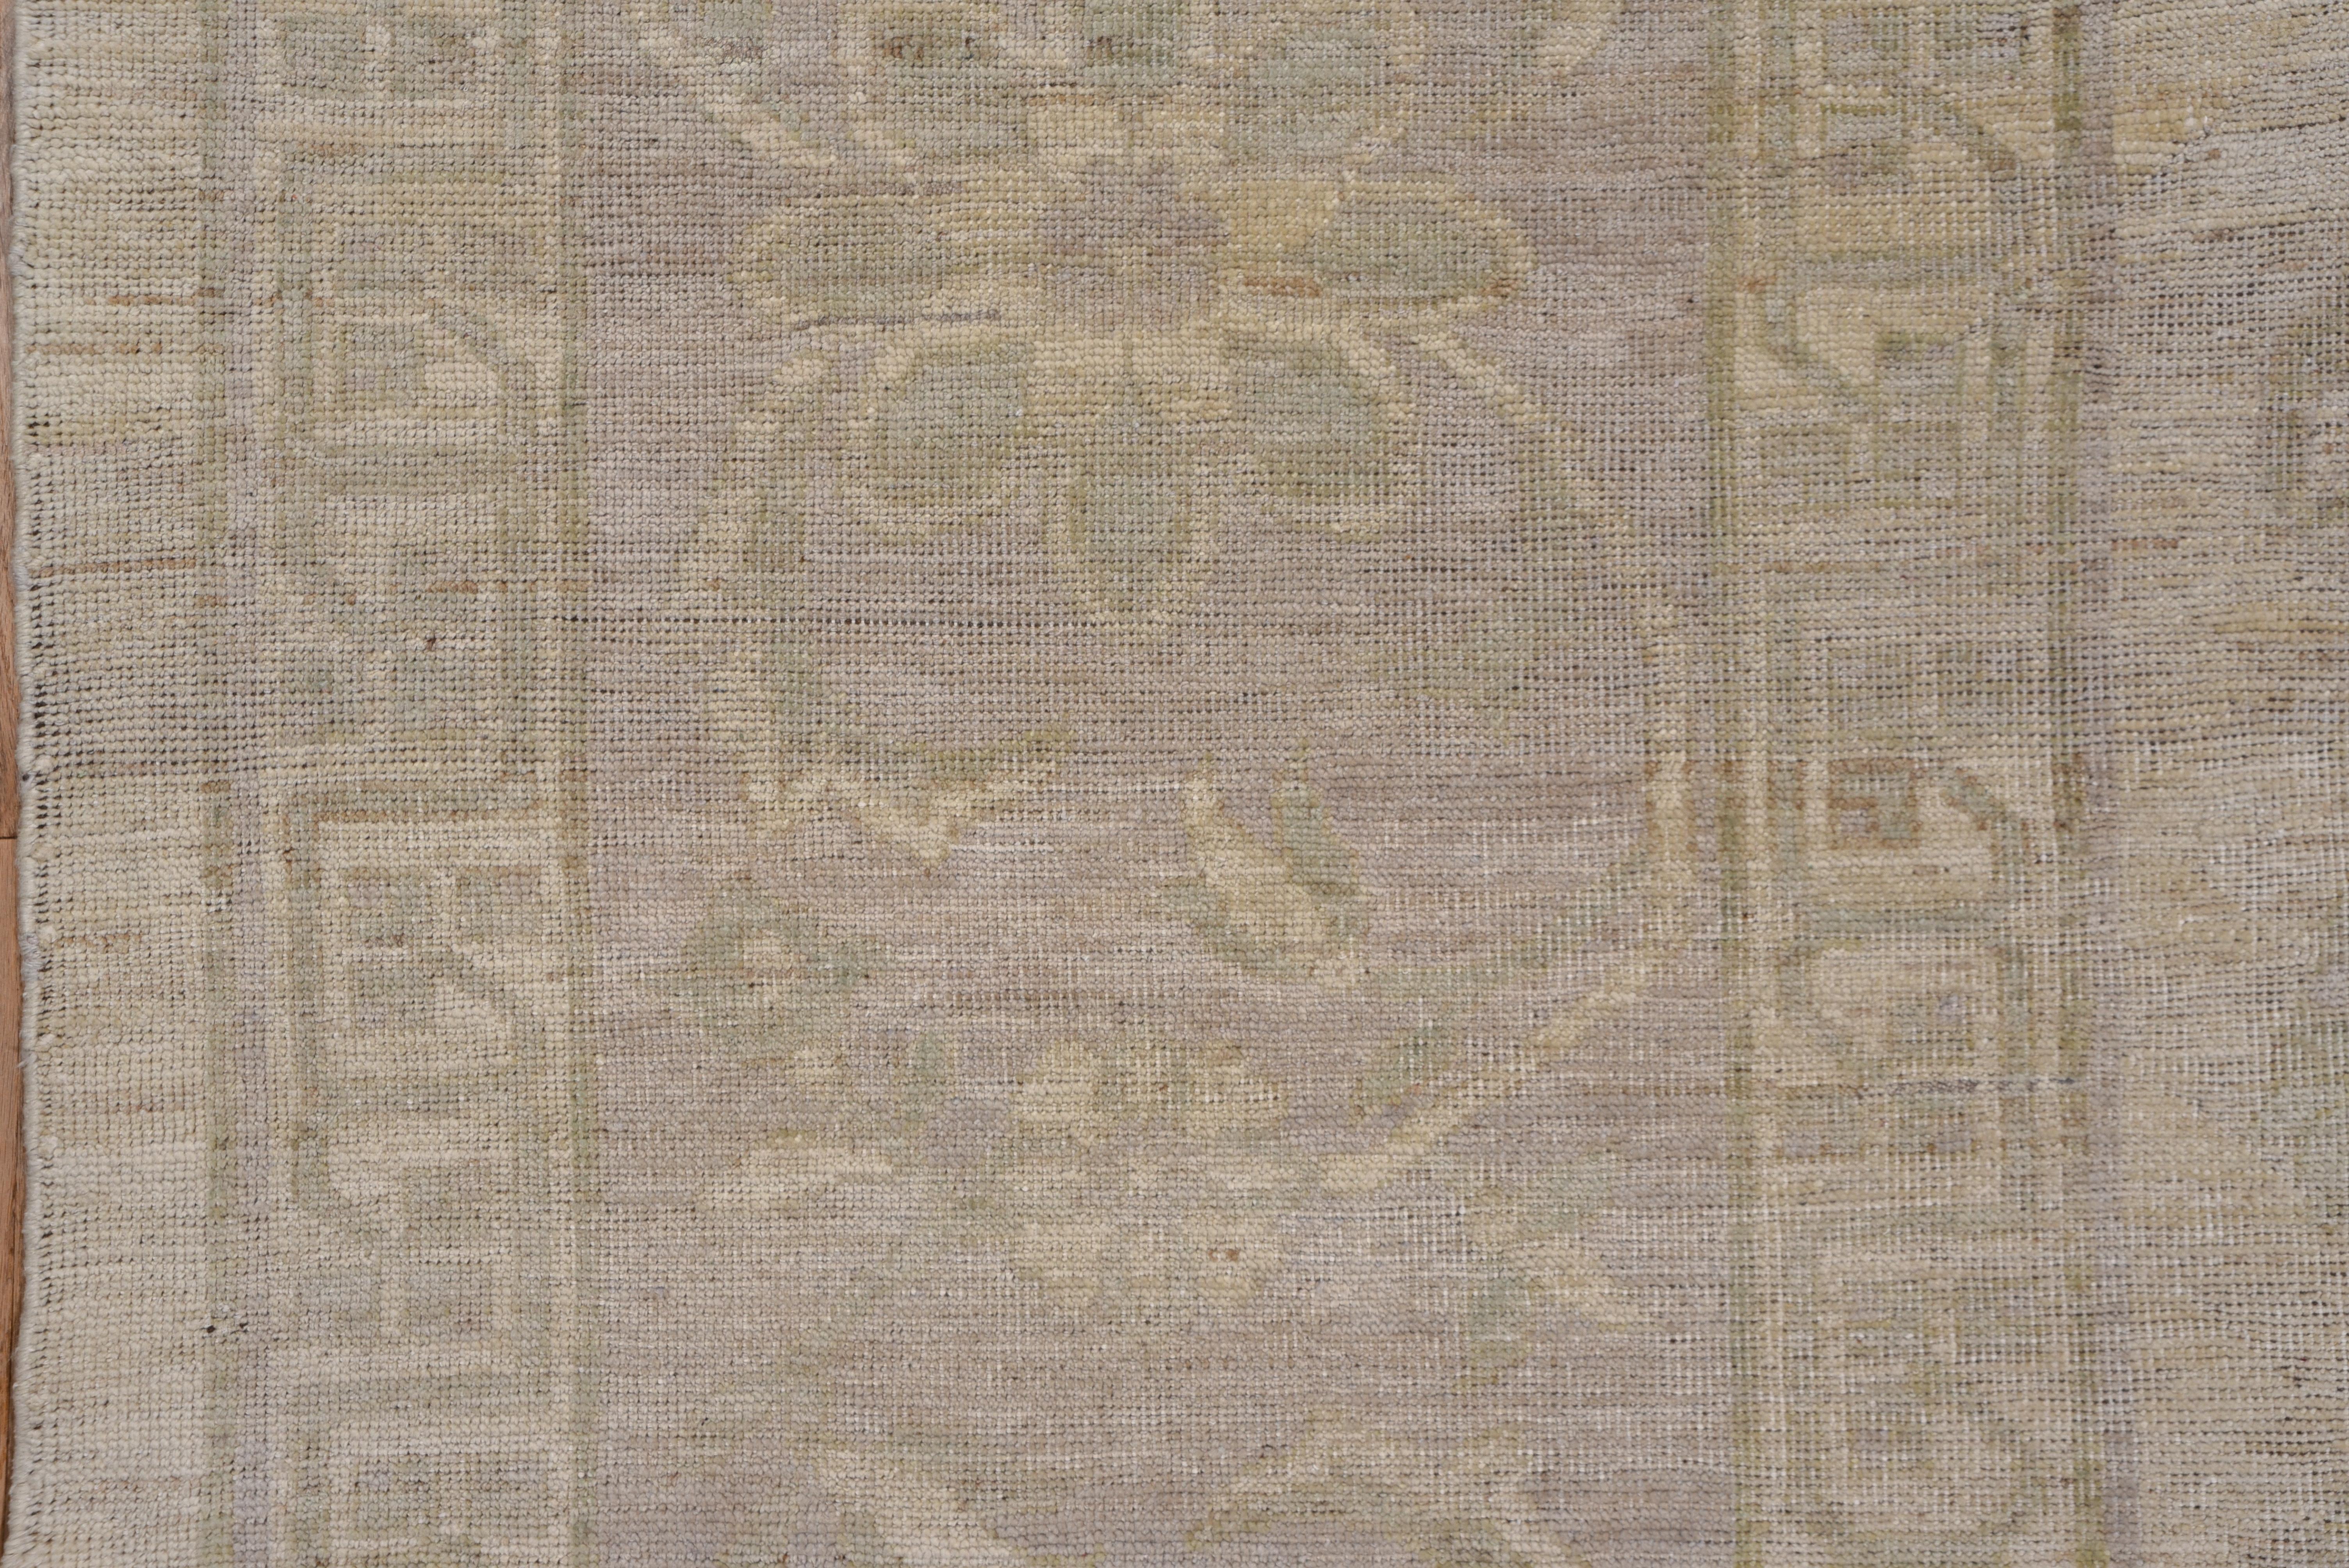 Contemporary Hand Knotted Khotan Design Large Rug, Soft Lavender Borders, Green Accents